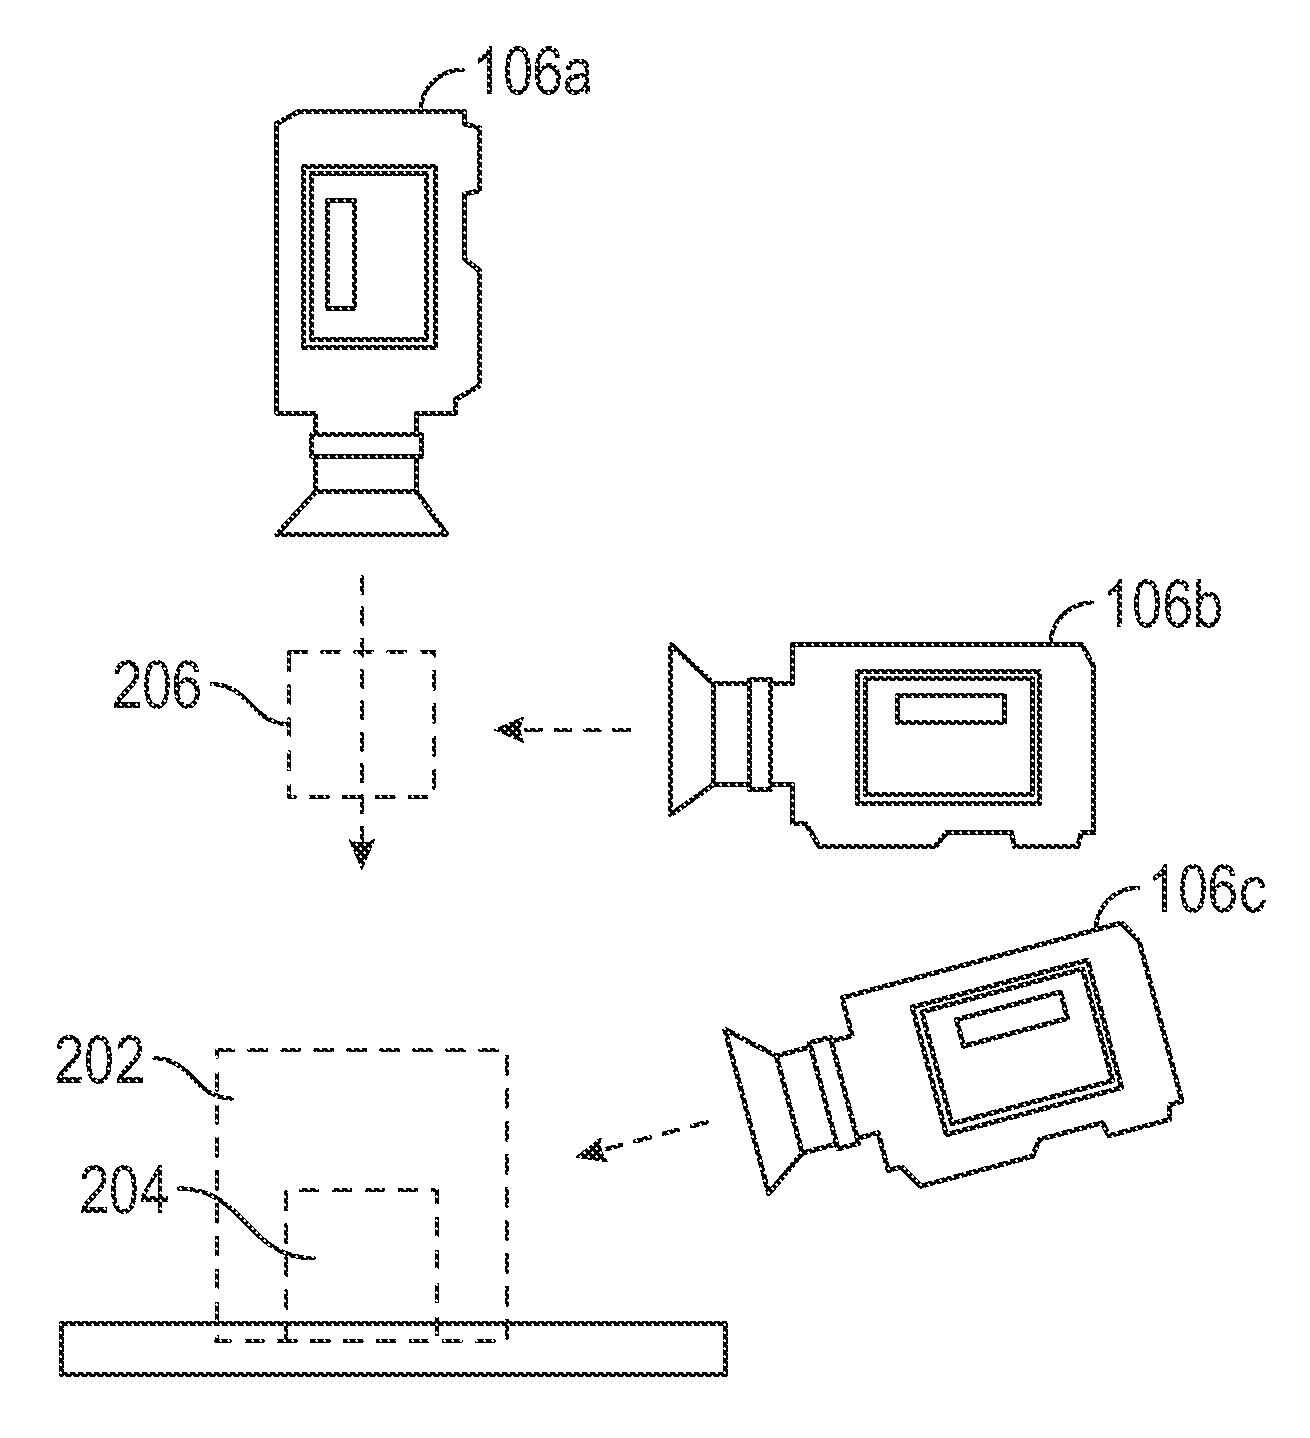 System and method for probe-based high precision spatial orientation control and assembly of parts for microassembly using computer vision